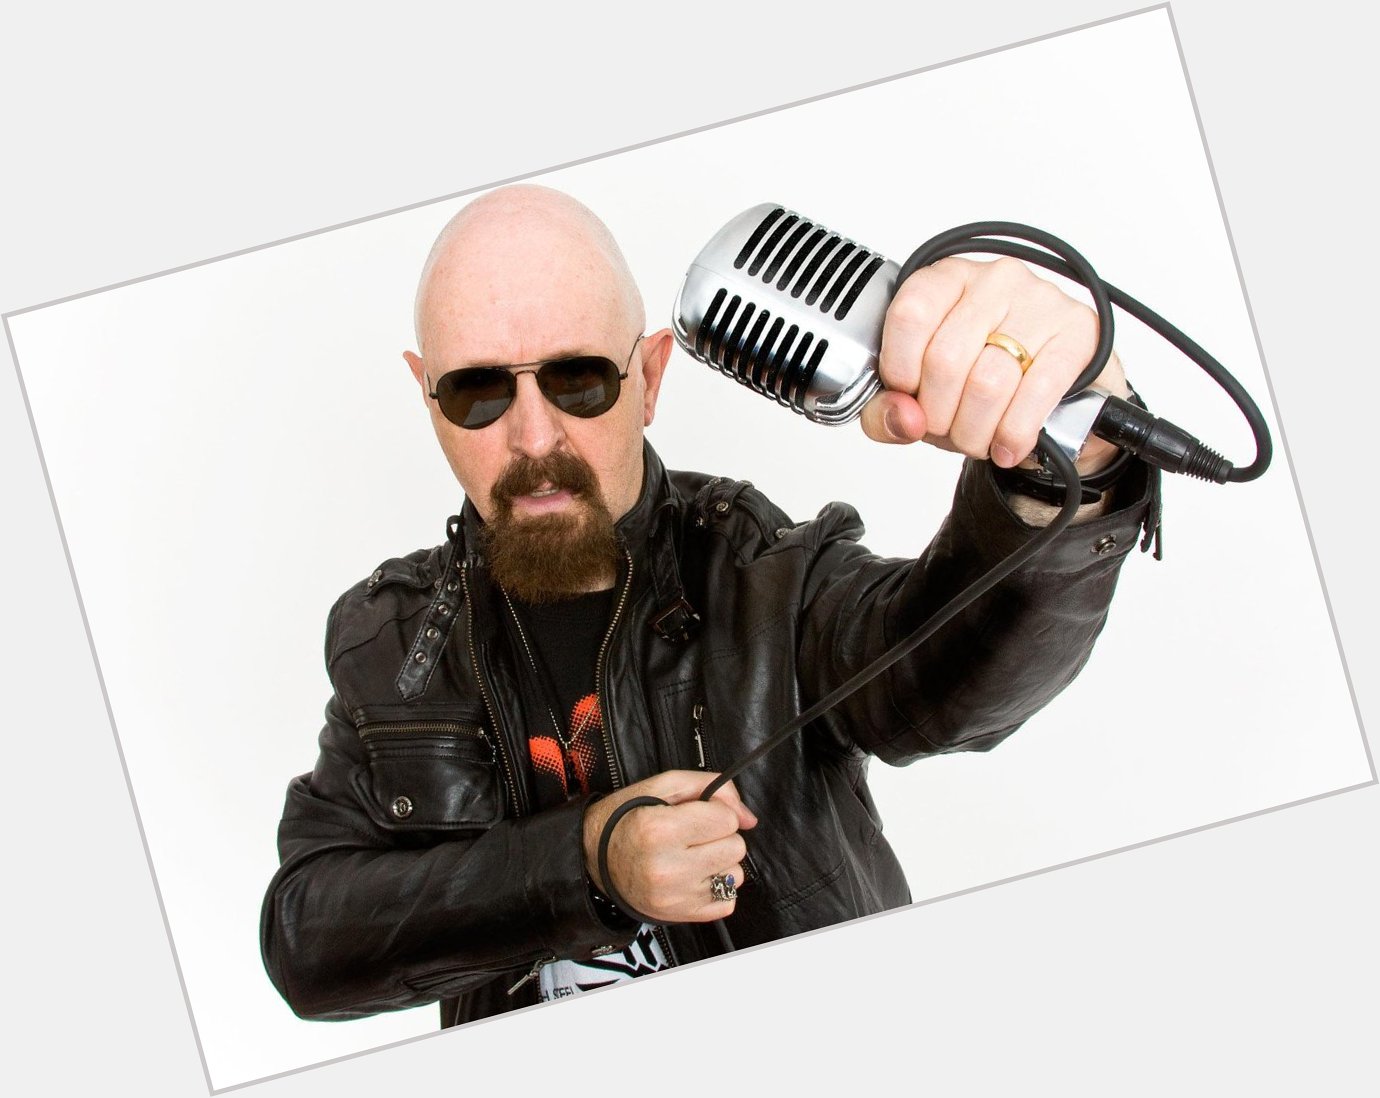 Today Rob Halford, the vocalist of is turning 64! Happy bday from MH Italia and its readers! \\m/ 